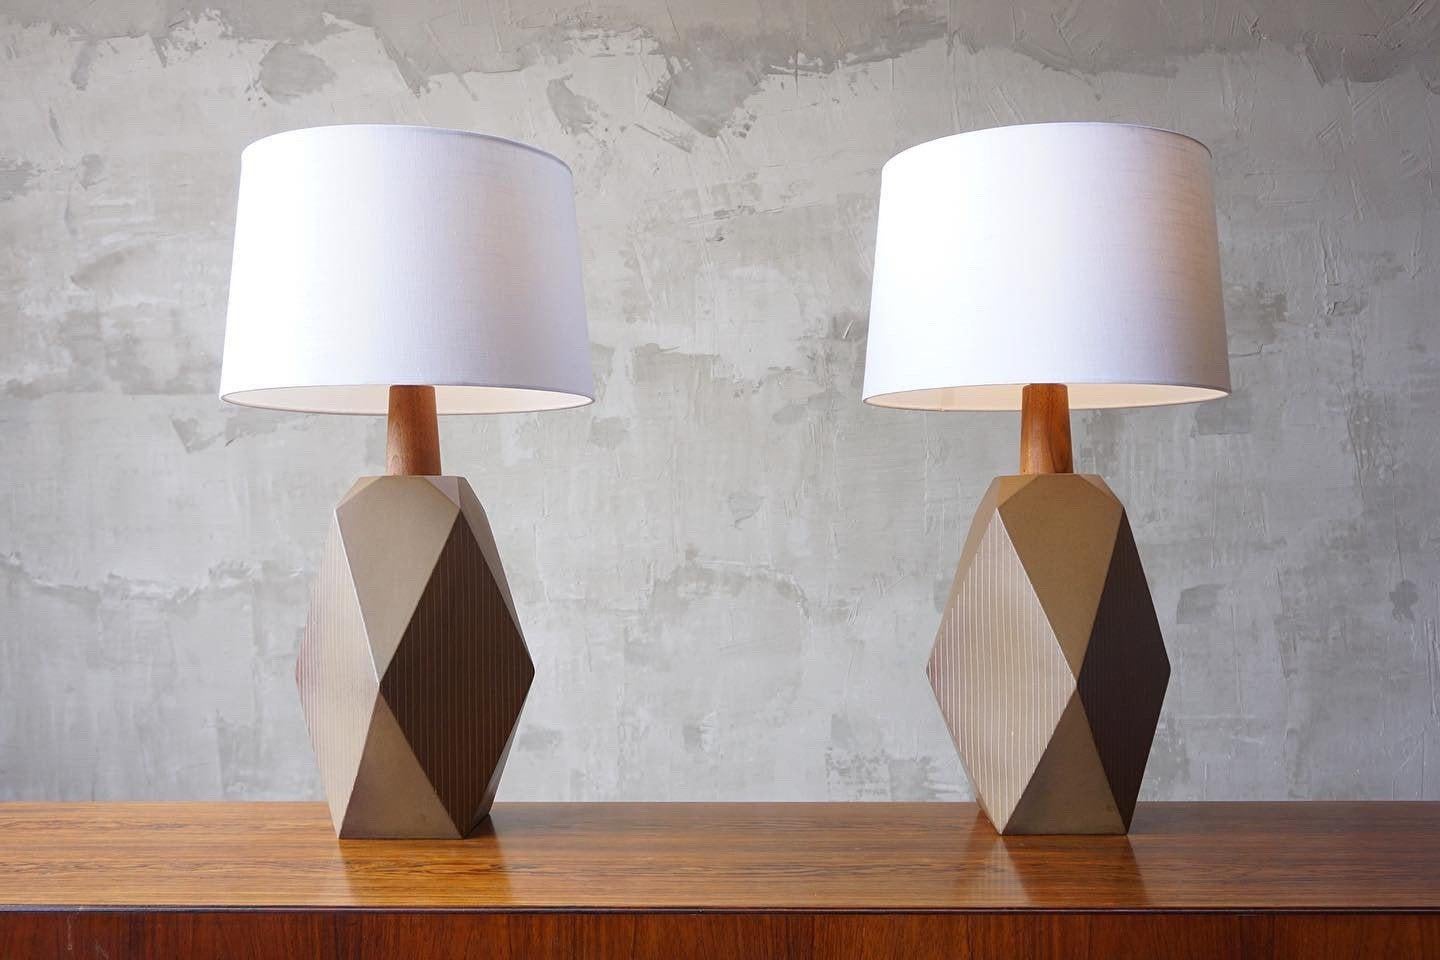 Exceptional pair of matte glazed geometric ceramic table lamps with vertical sgraffito patterning by Jane and Gordon Martz for Marshall Studios, circa 1960s. 

Both in excellent original condition, with original solid walnut finials included.